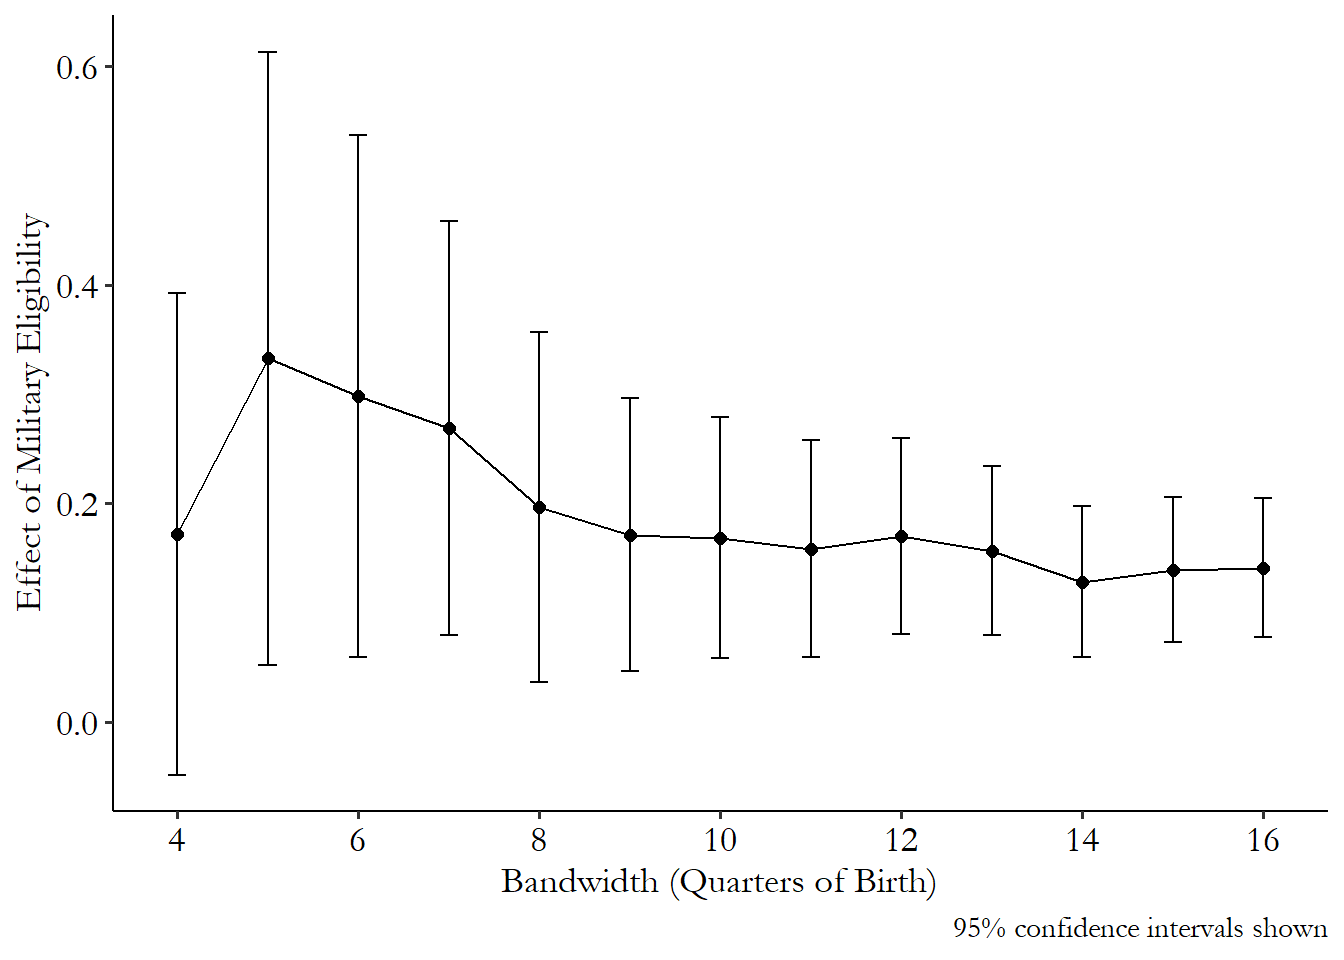 Graph showing the estimated effect of mortgage subsidies on home ownership rates, estimated with different bandwidths. The confidence intervals are much larger for narrower bandwidths. After about 8 quarters of bandwidth, the estimated effect is fairly consistent.